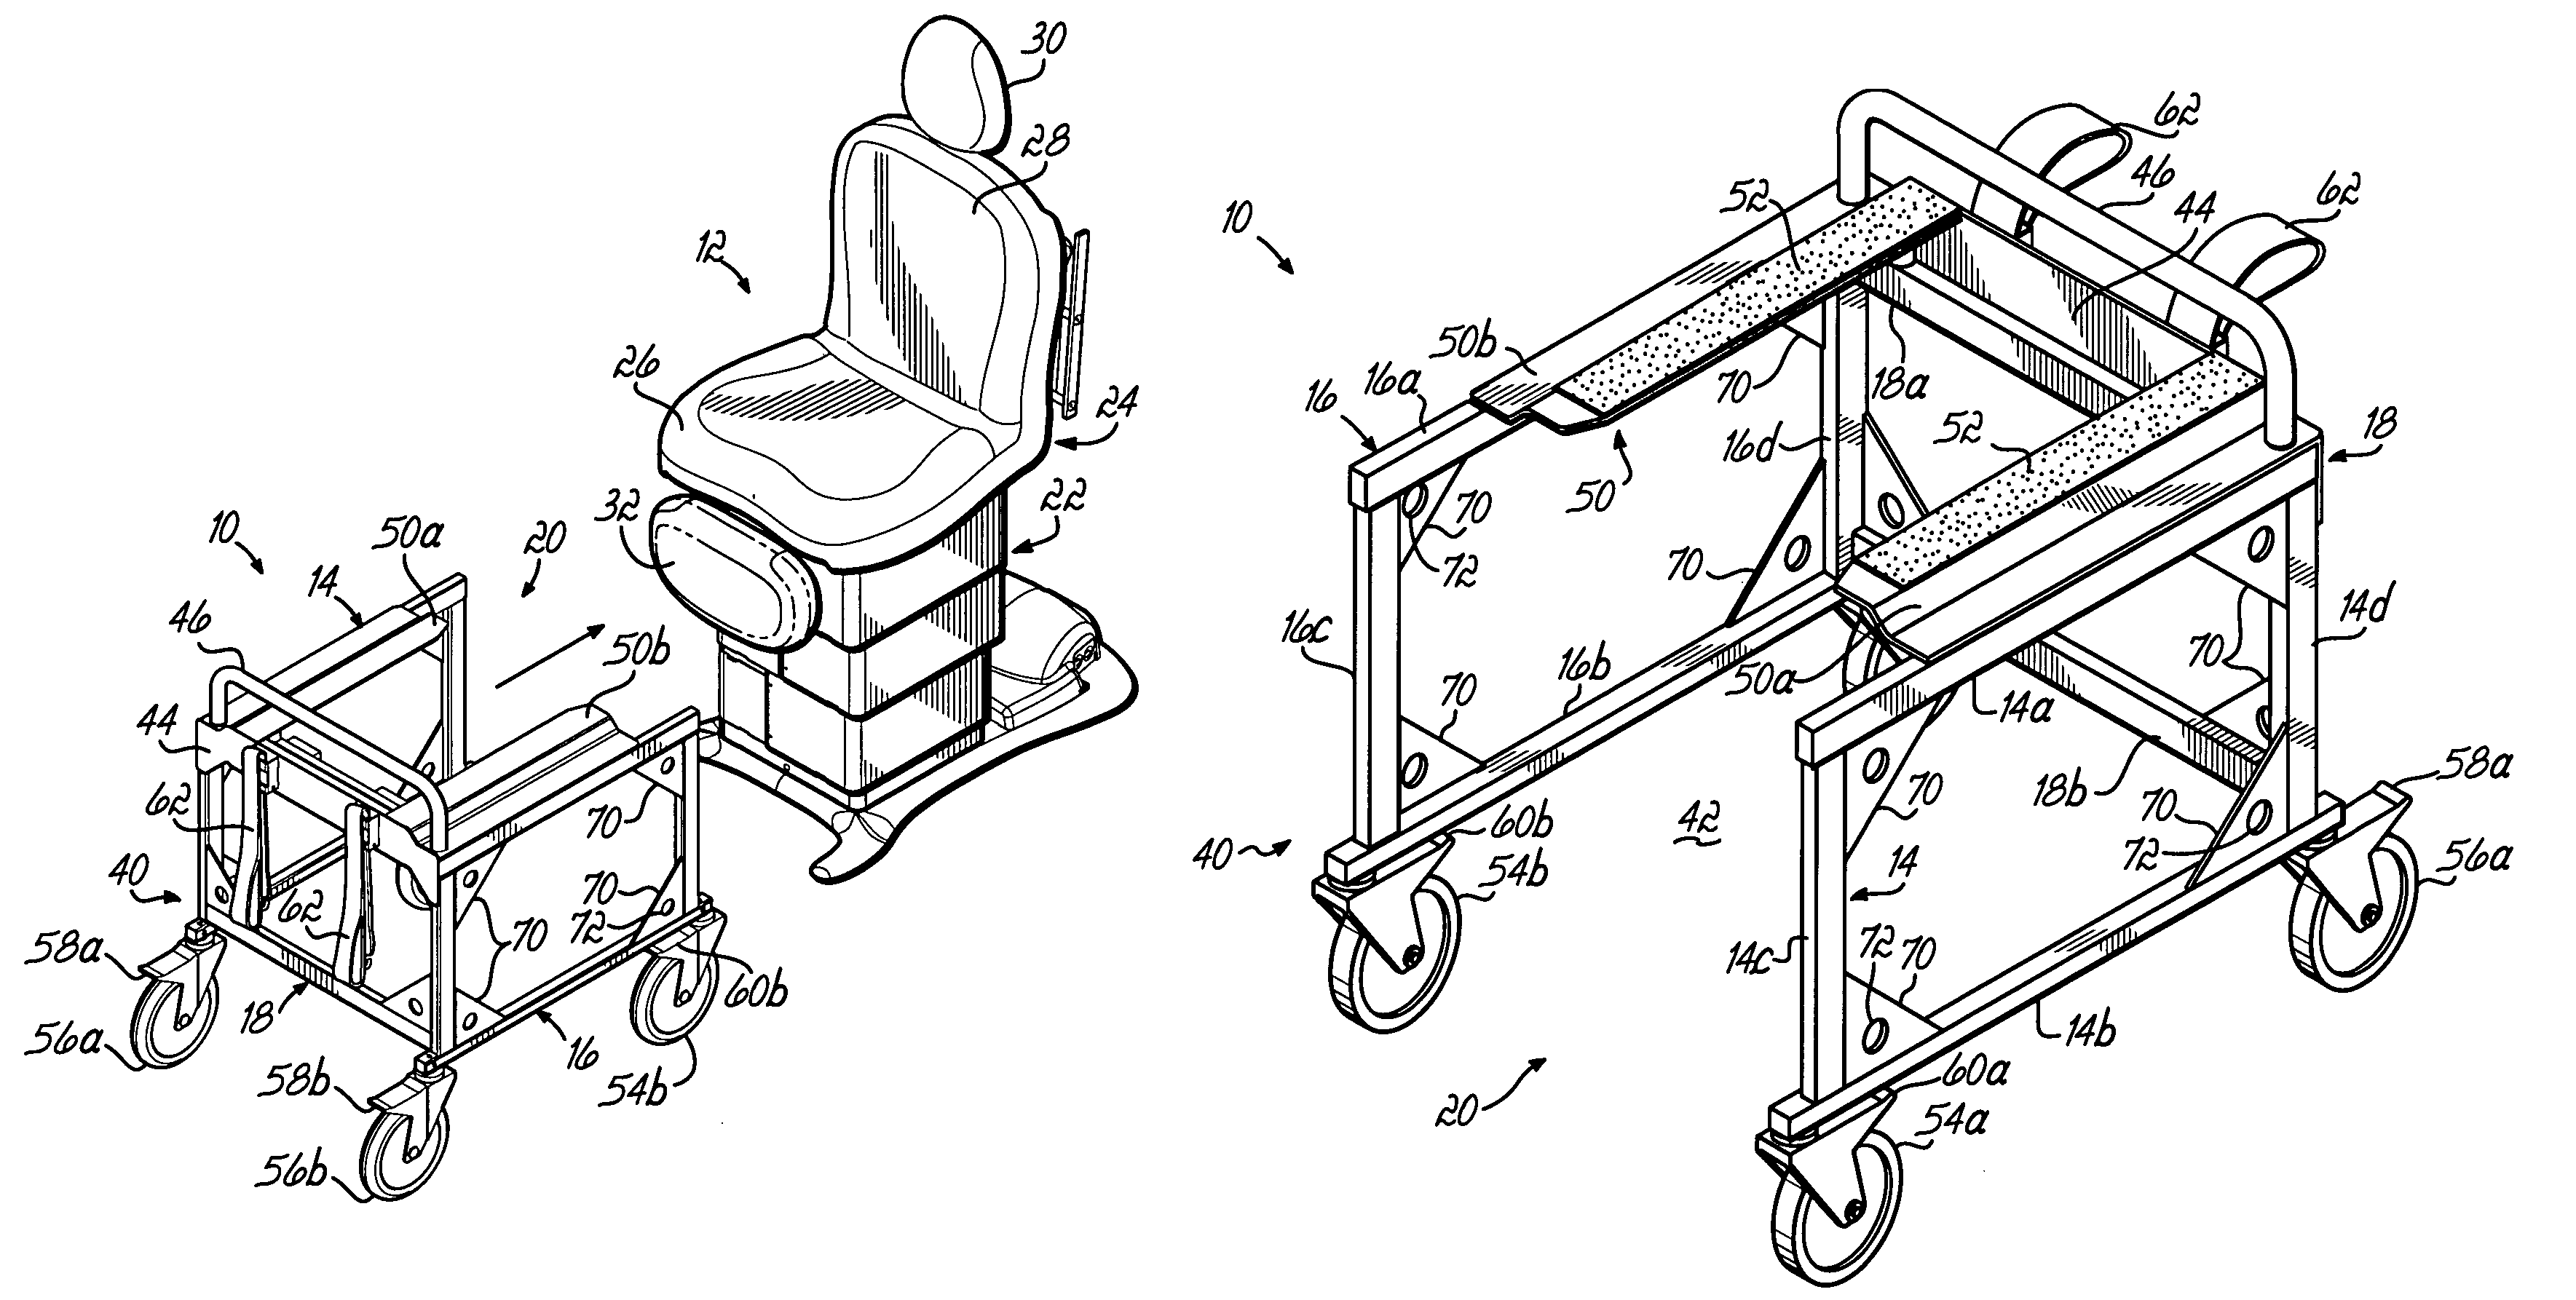 Apparatus and method for relocating a medical examination table